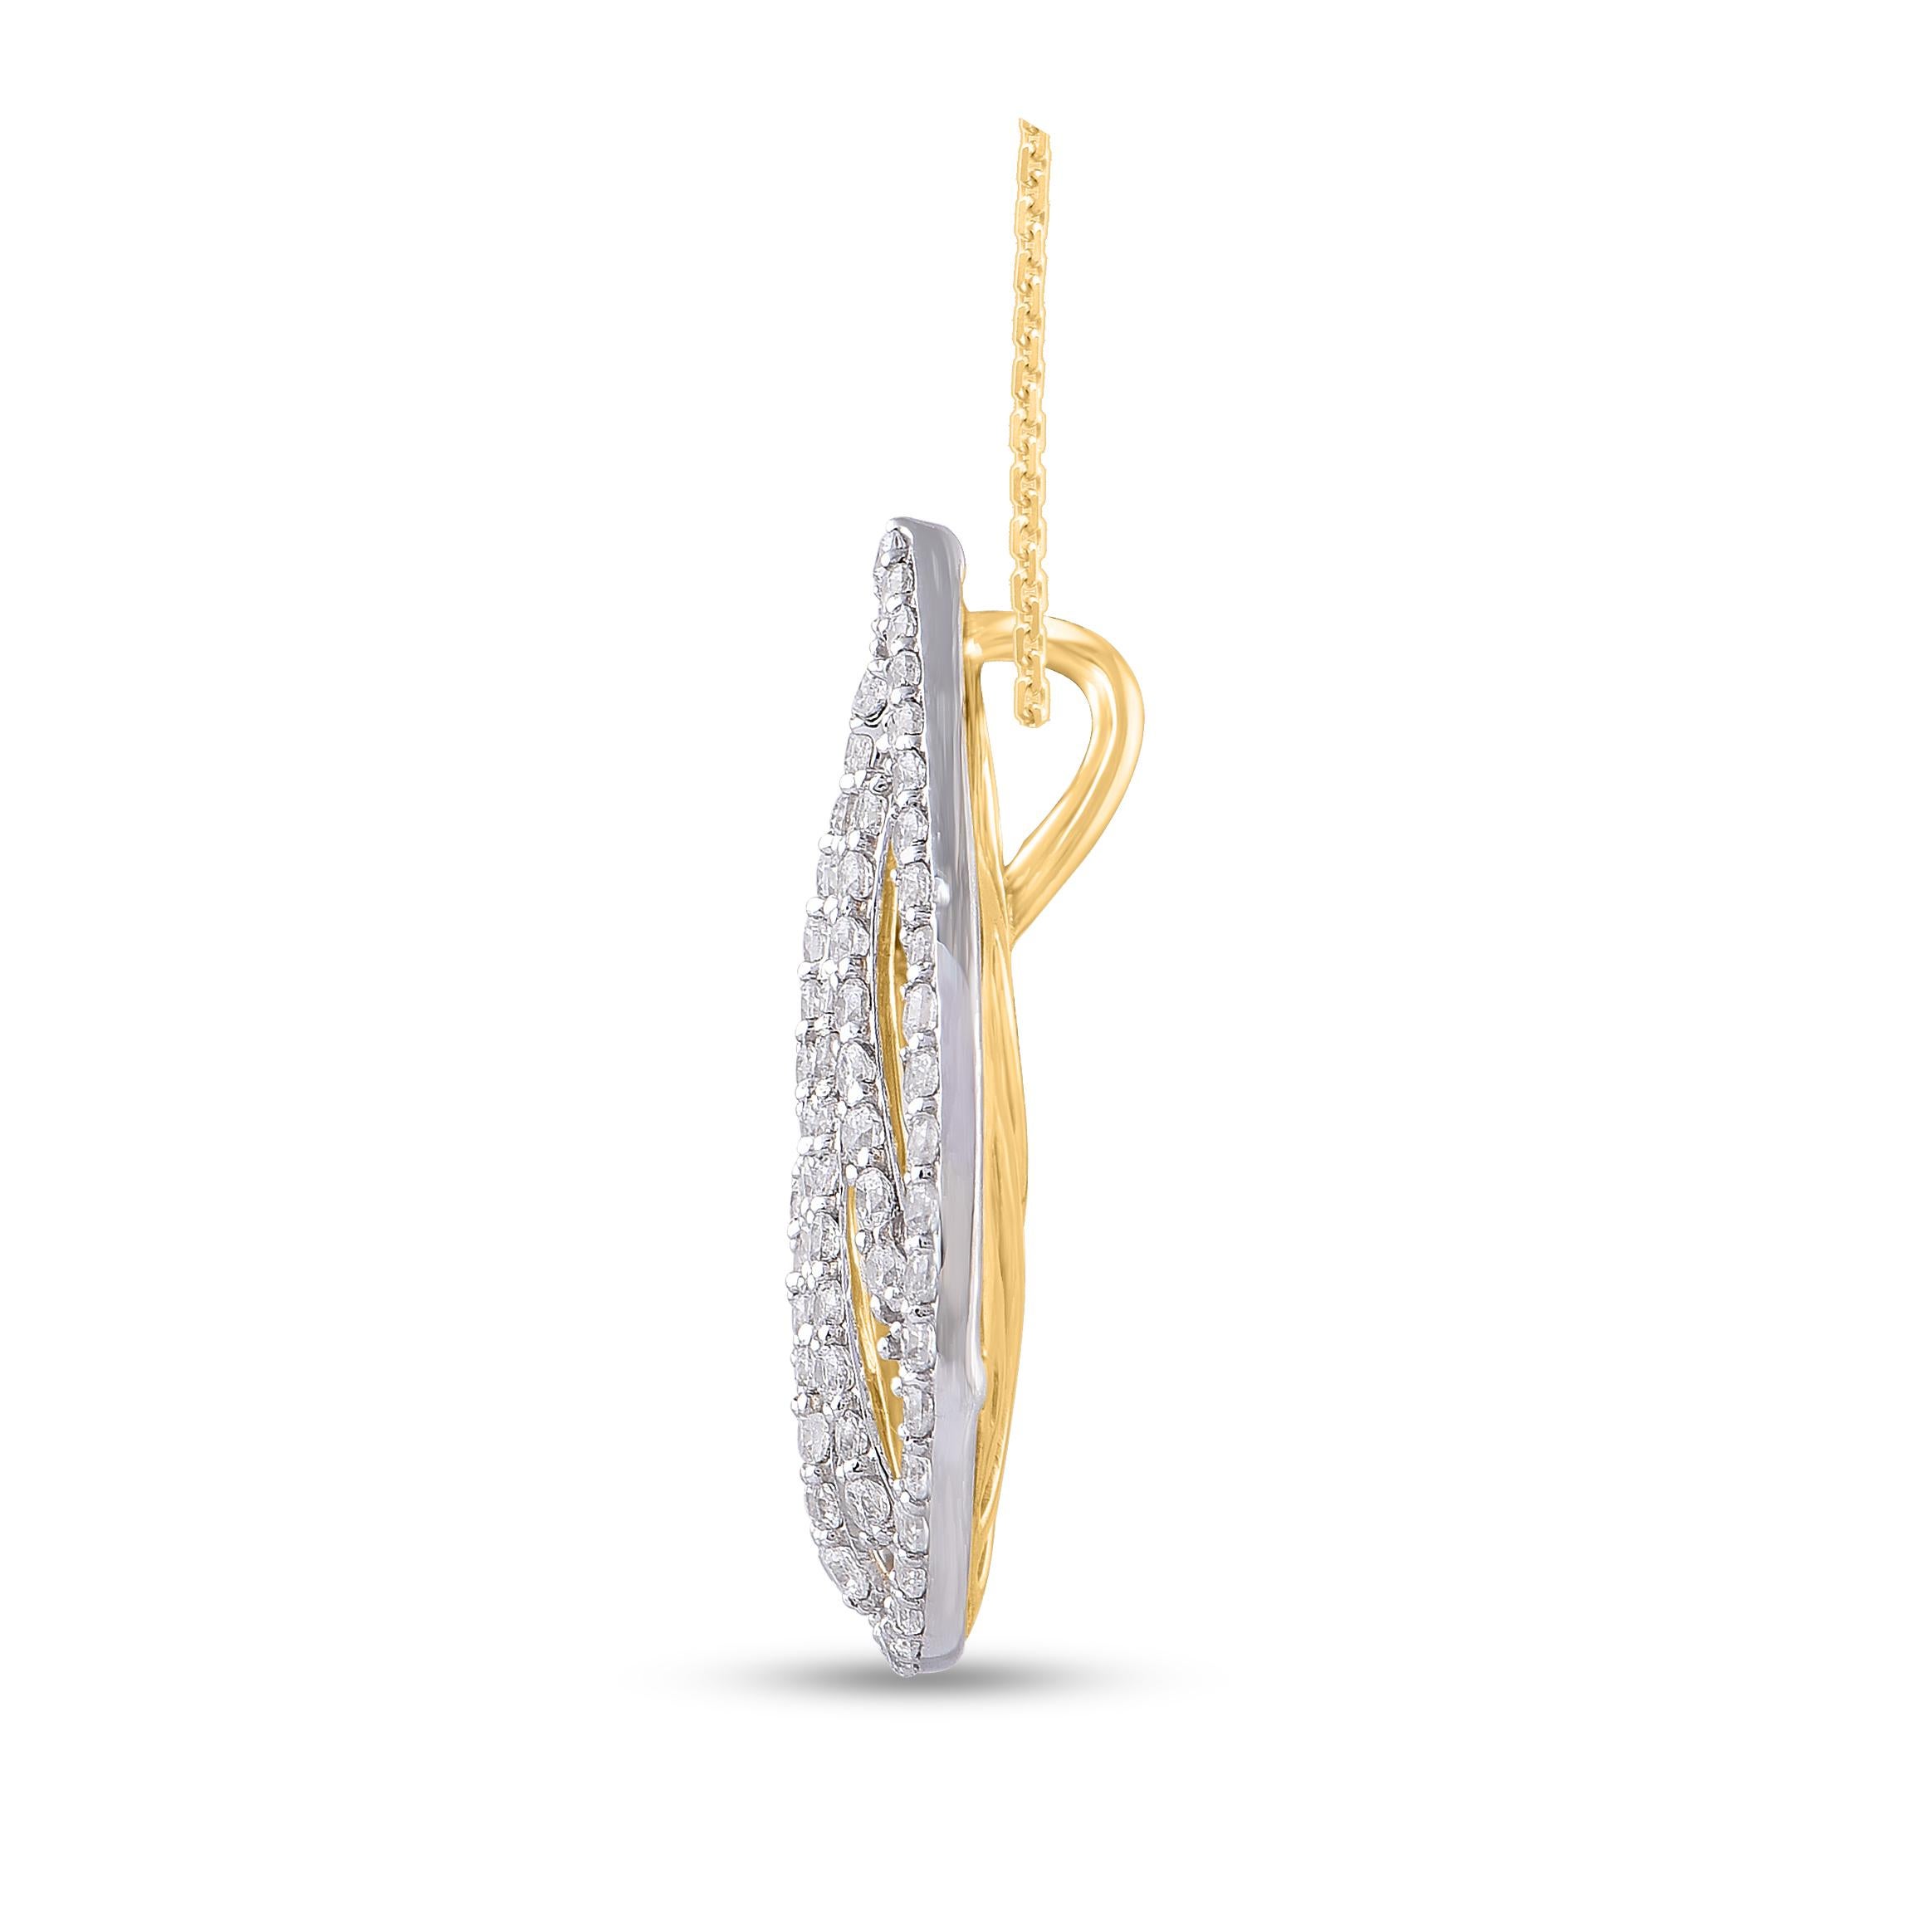 This diamond pear pendant necklace fits any occasion with ease. These pendants are studded with 96 brilliant cut natural diamonds in prongs setting in 14kt yellow gold. Diamonds are graded as H-I color and I-2 clarity. Pendant suspends along a cable